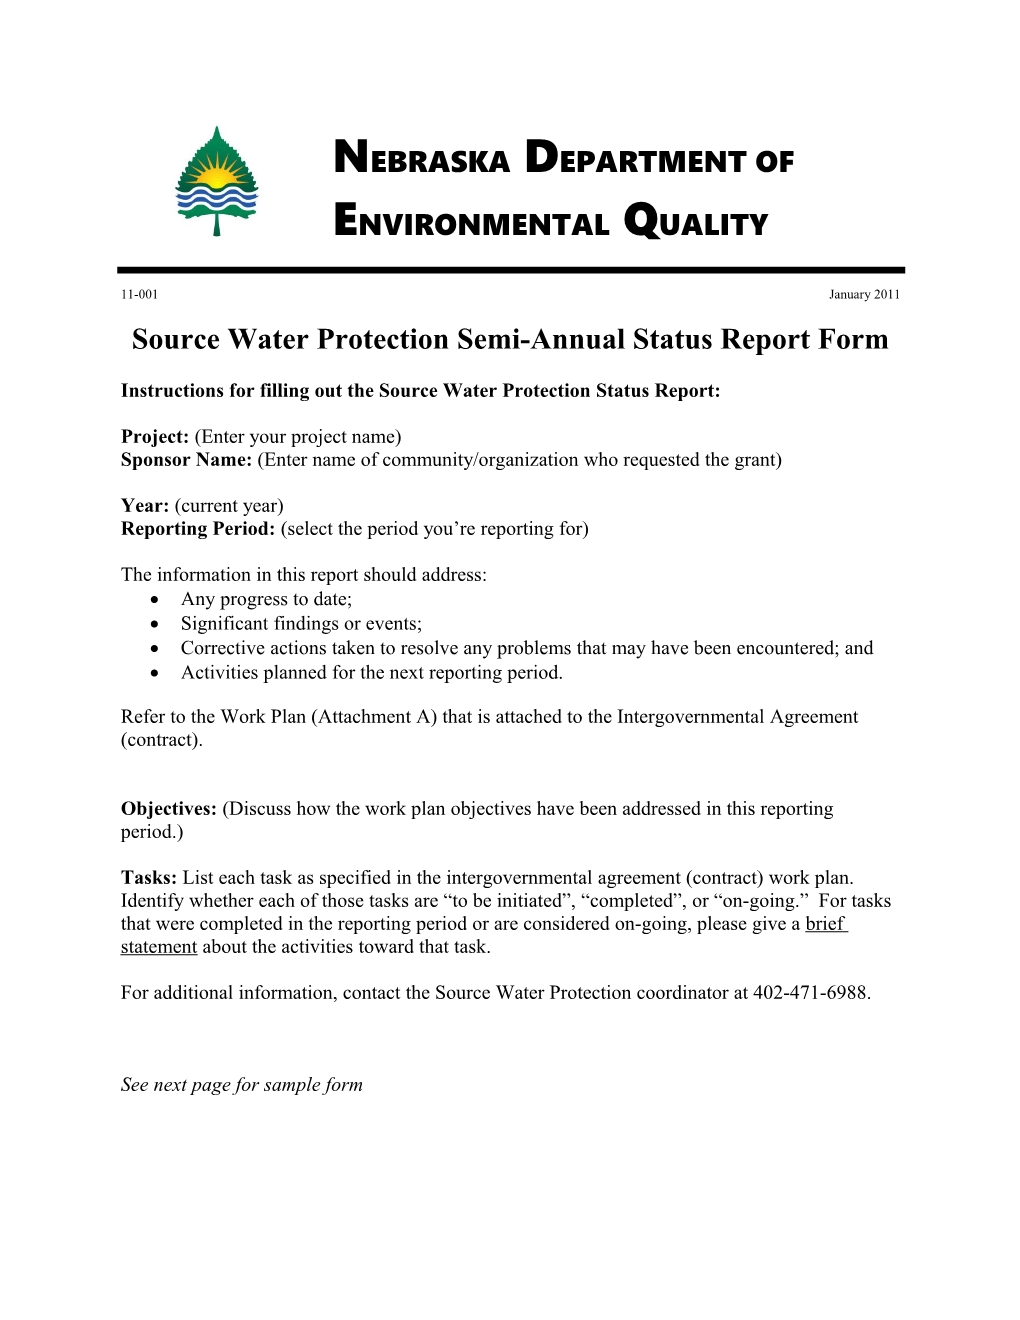 Using the Source Water Protection Status Report